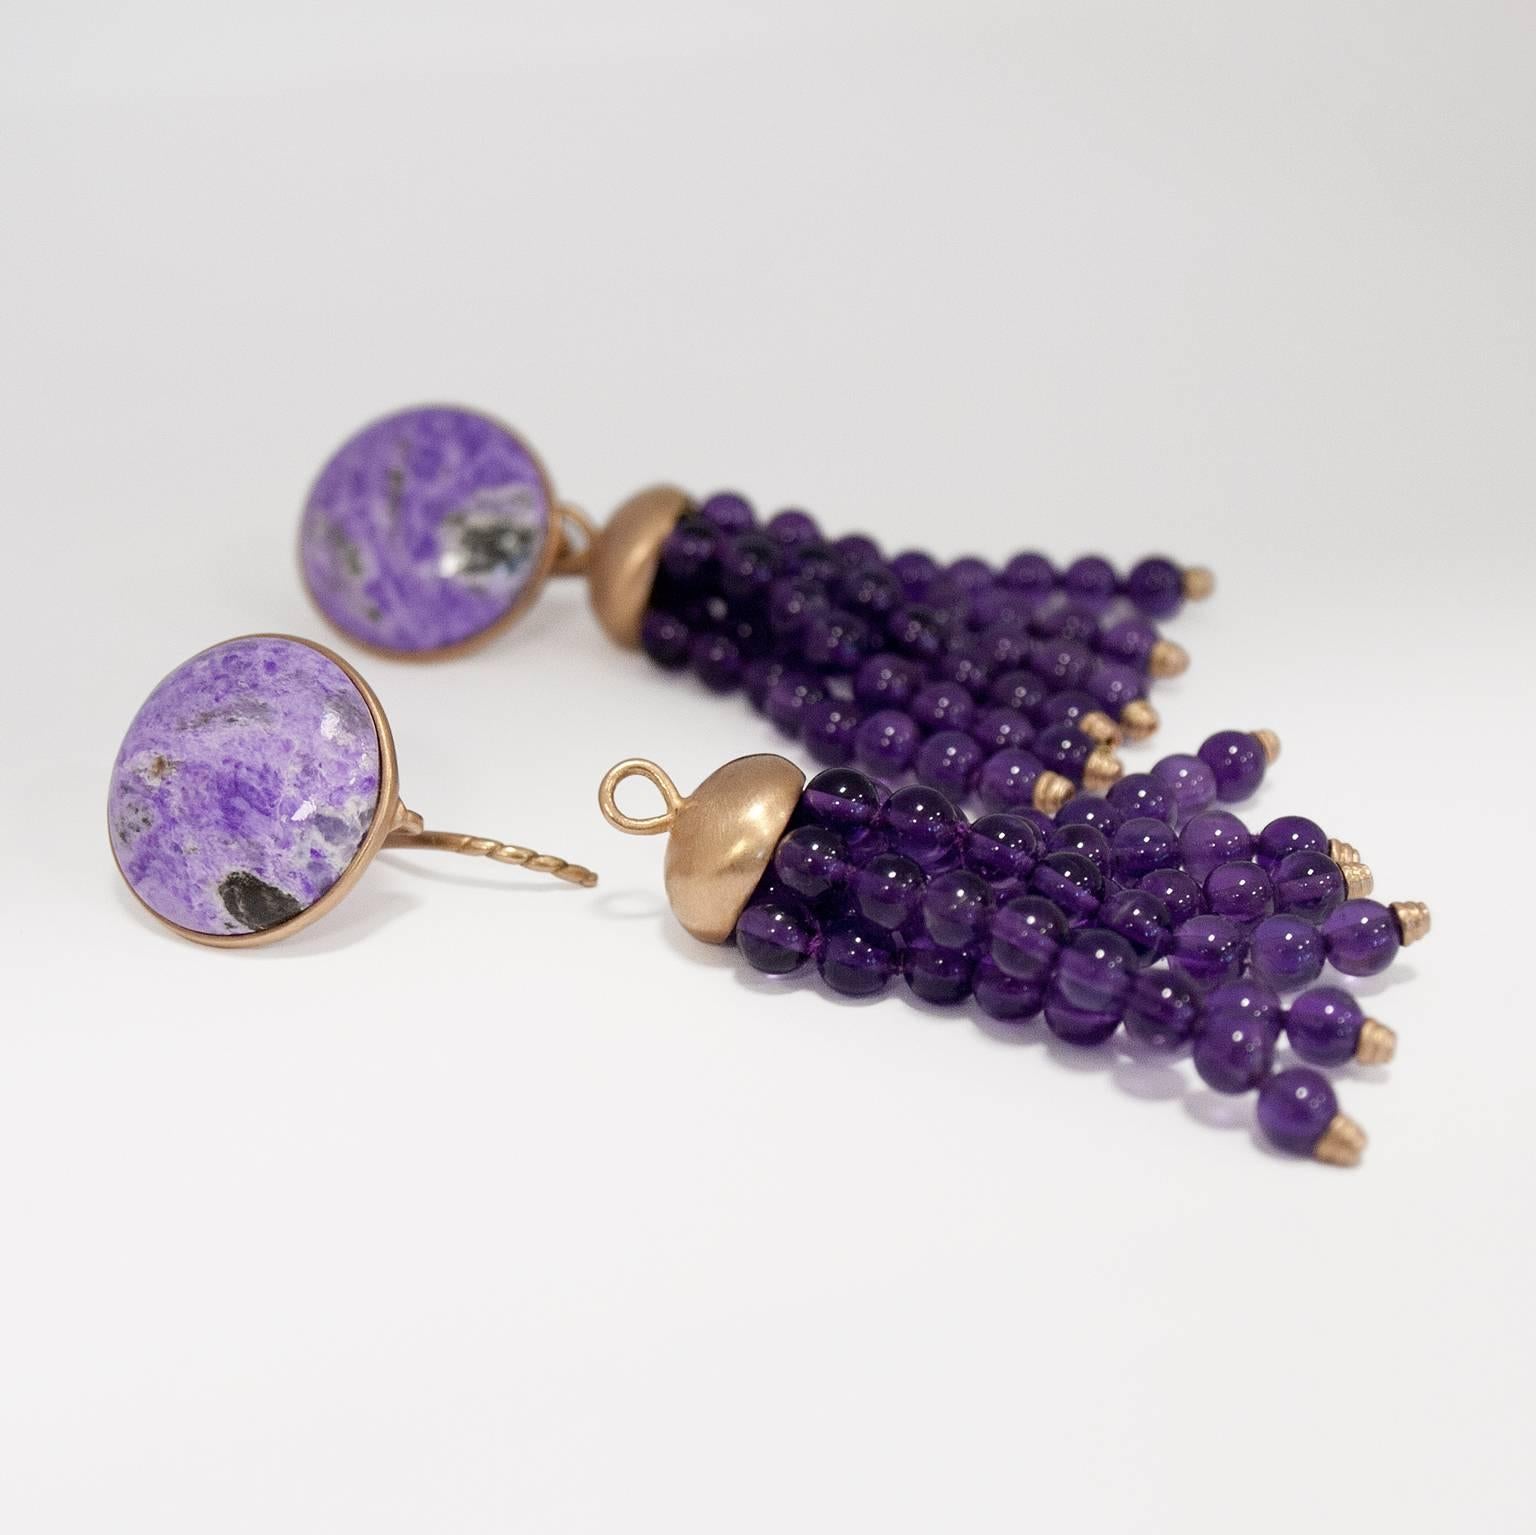 Roman Style Sugelite Amethyst Red 18Kt Gold Stud and Dangle Drop Earrings Made in italy
These Earrings have two studs in sugelite of 16mm diameter. You can remove the amethyst tassels from the studs to create a different effect, for each occasion